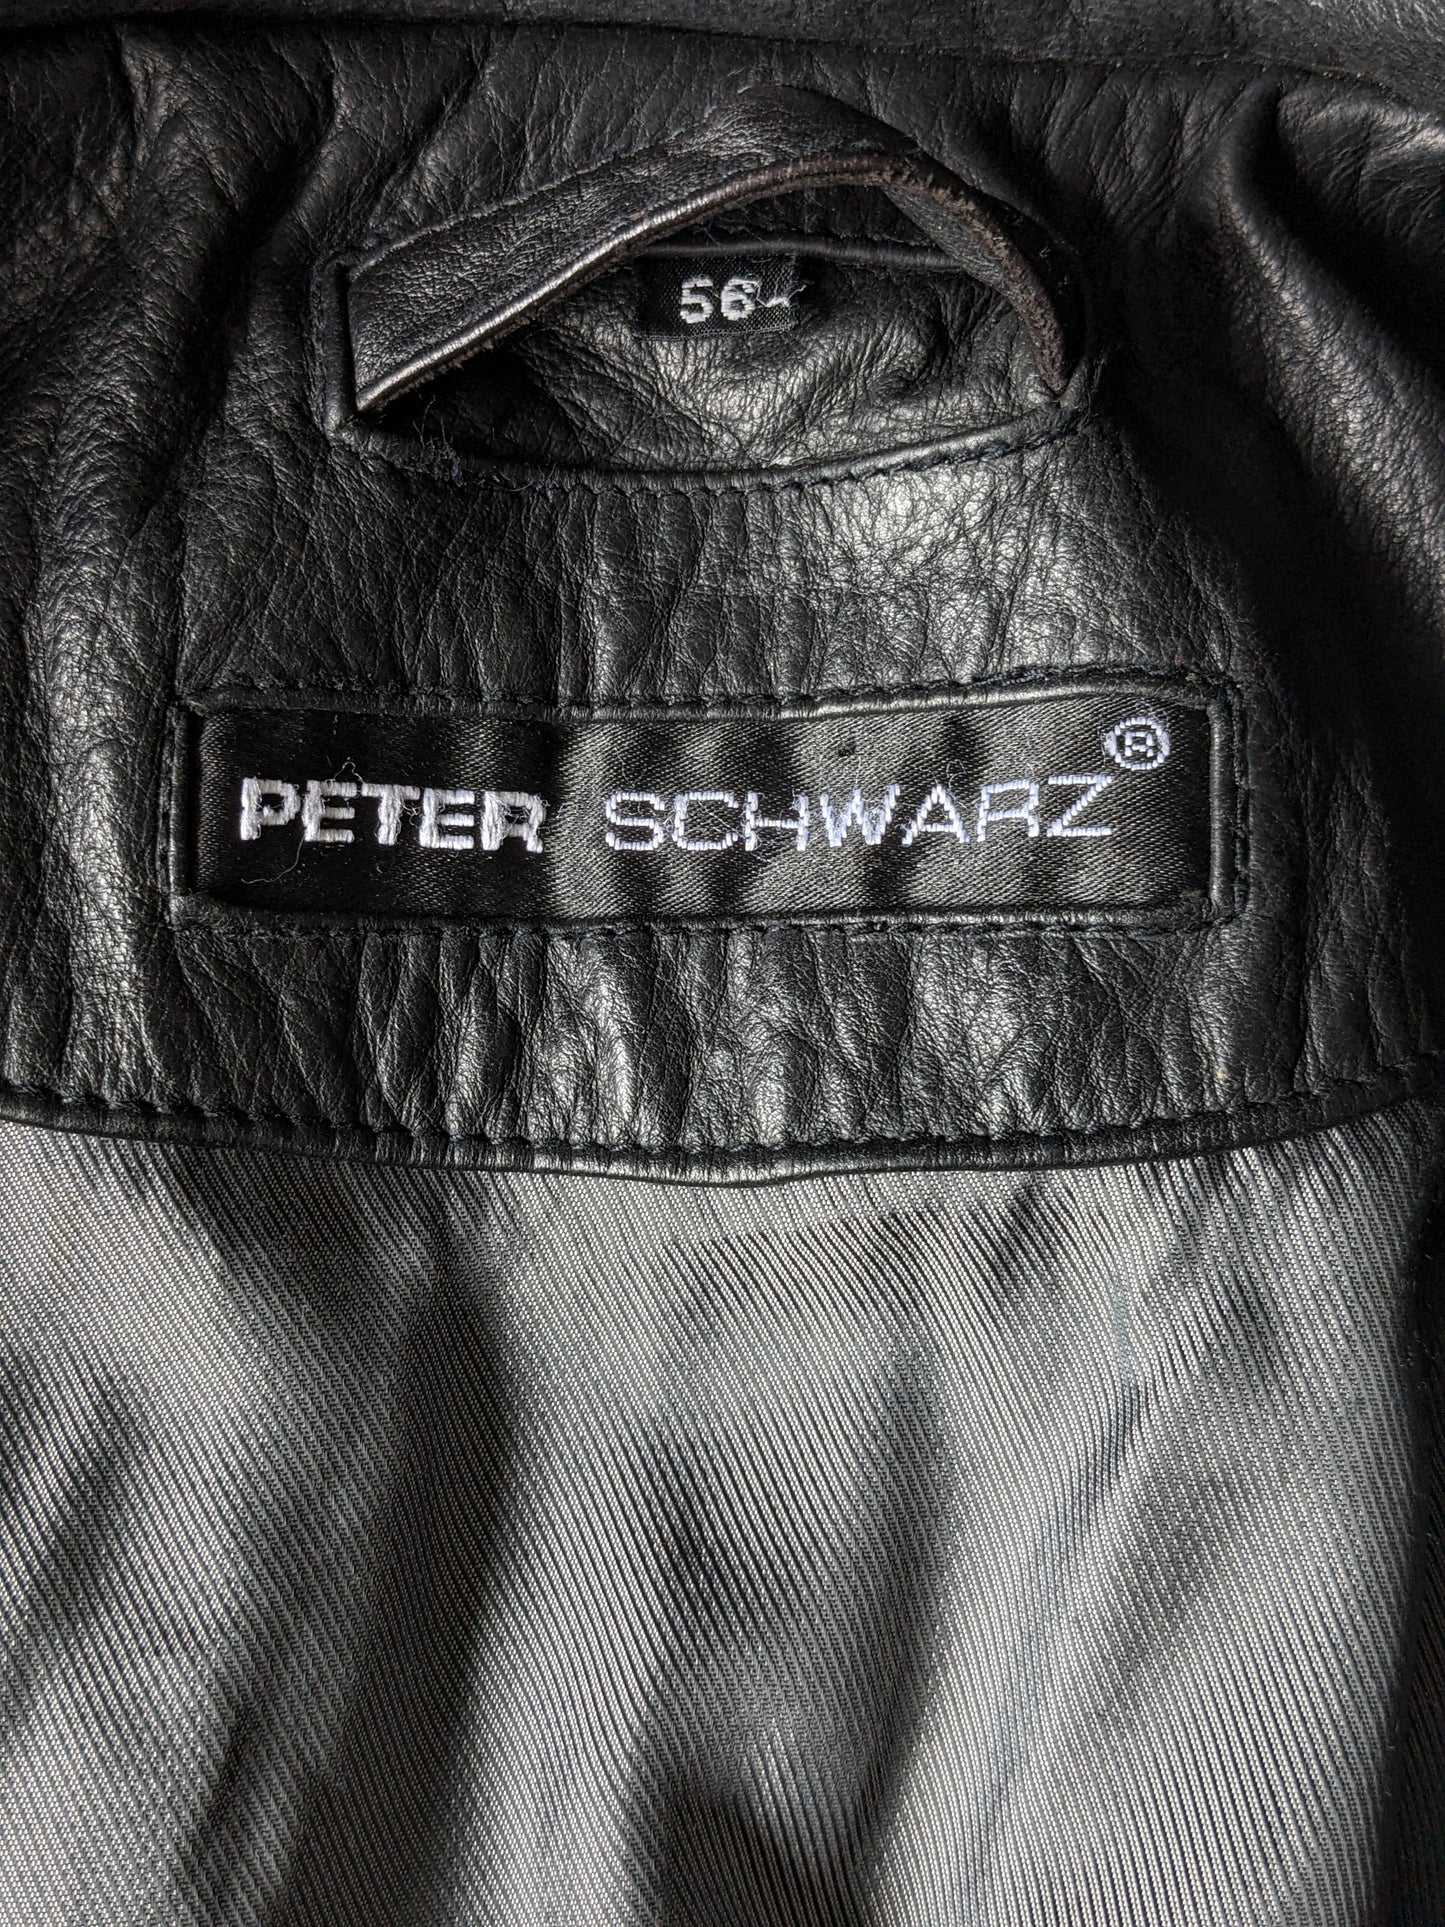 Peter Schwarz Learn Body Warmer. Double closure and 2 inner pockets. Black colored. Size 56 / XL.